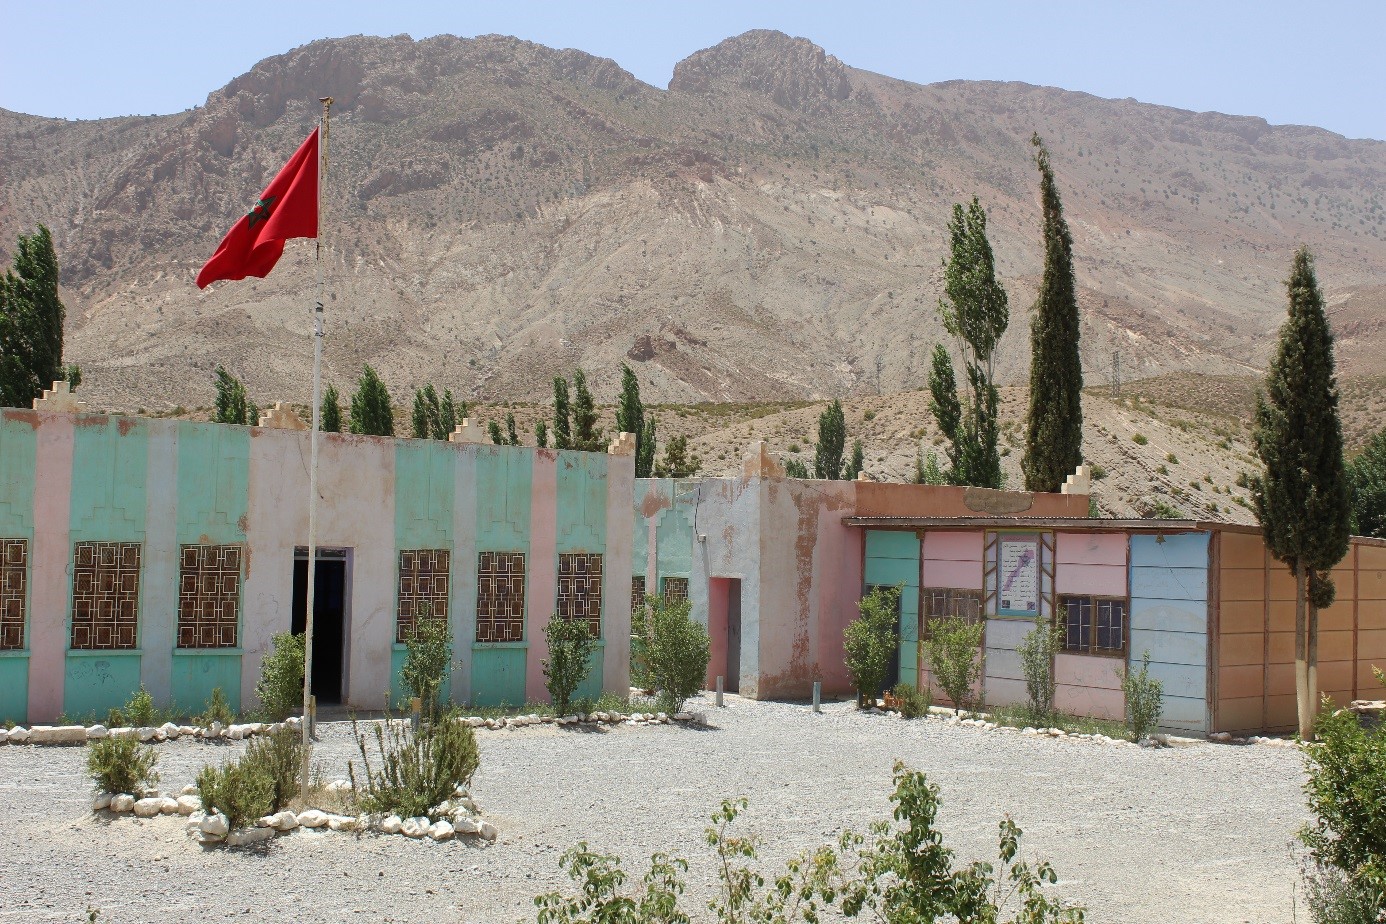 Typical mountain school, stone classroom, concrete classroom, prefabricated classroom. Wood coal stove for heating Morocco